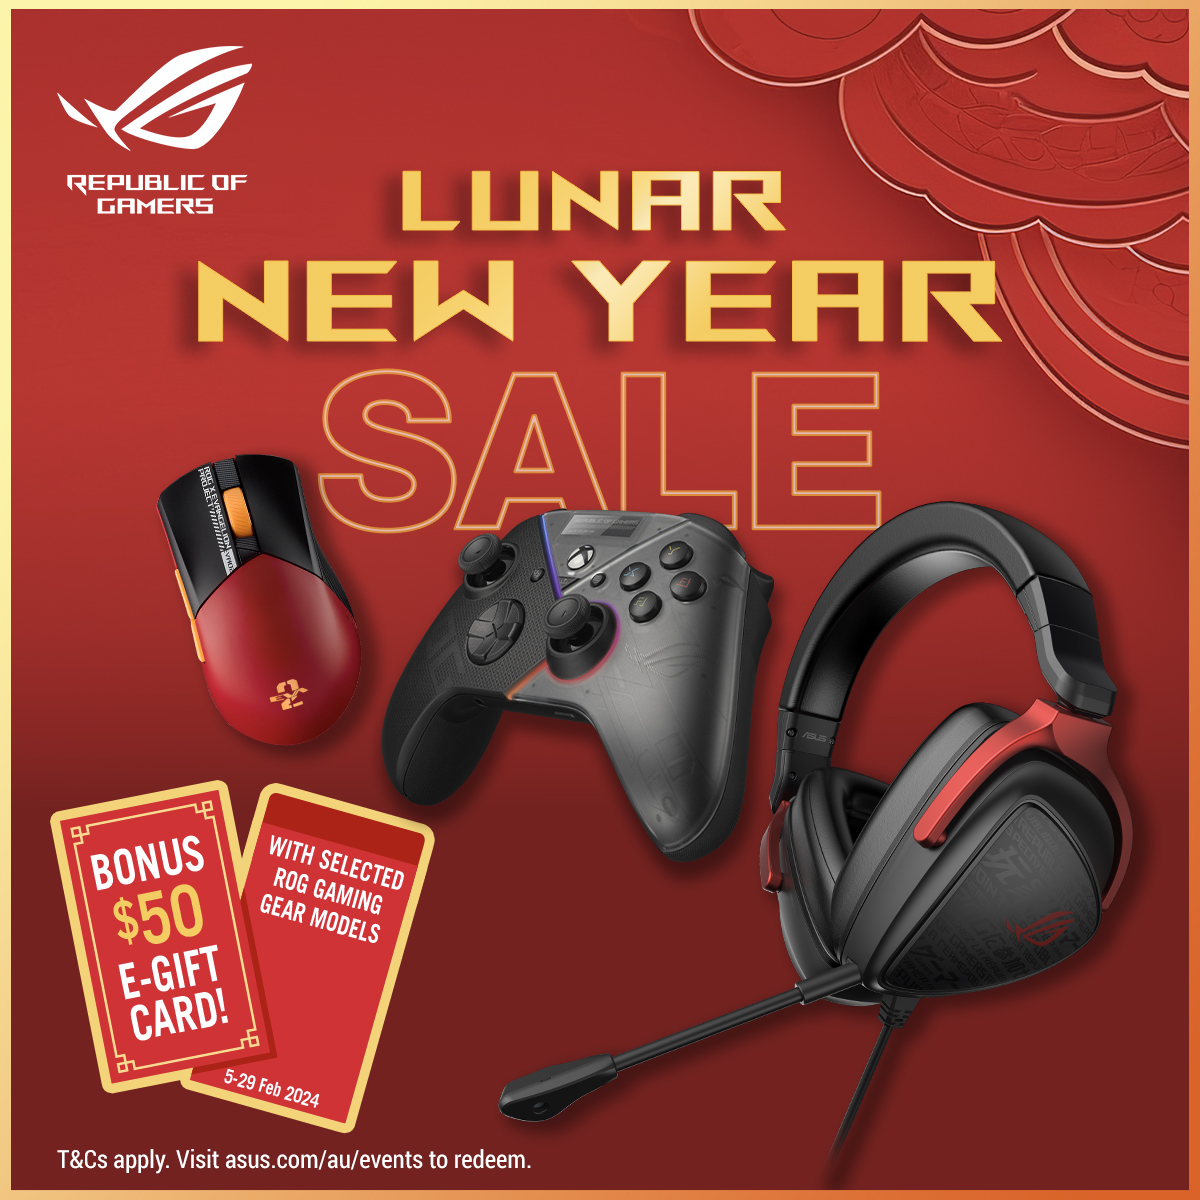 Lunar New Year Sale now on! 🧧🐉 Purchase selected ROG gaming peripherals and redeem a BONUS $50 E-Gift Card! Limited time only. Visit asus.com/au/events for T&Cs.